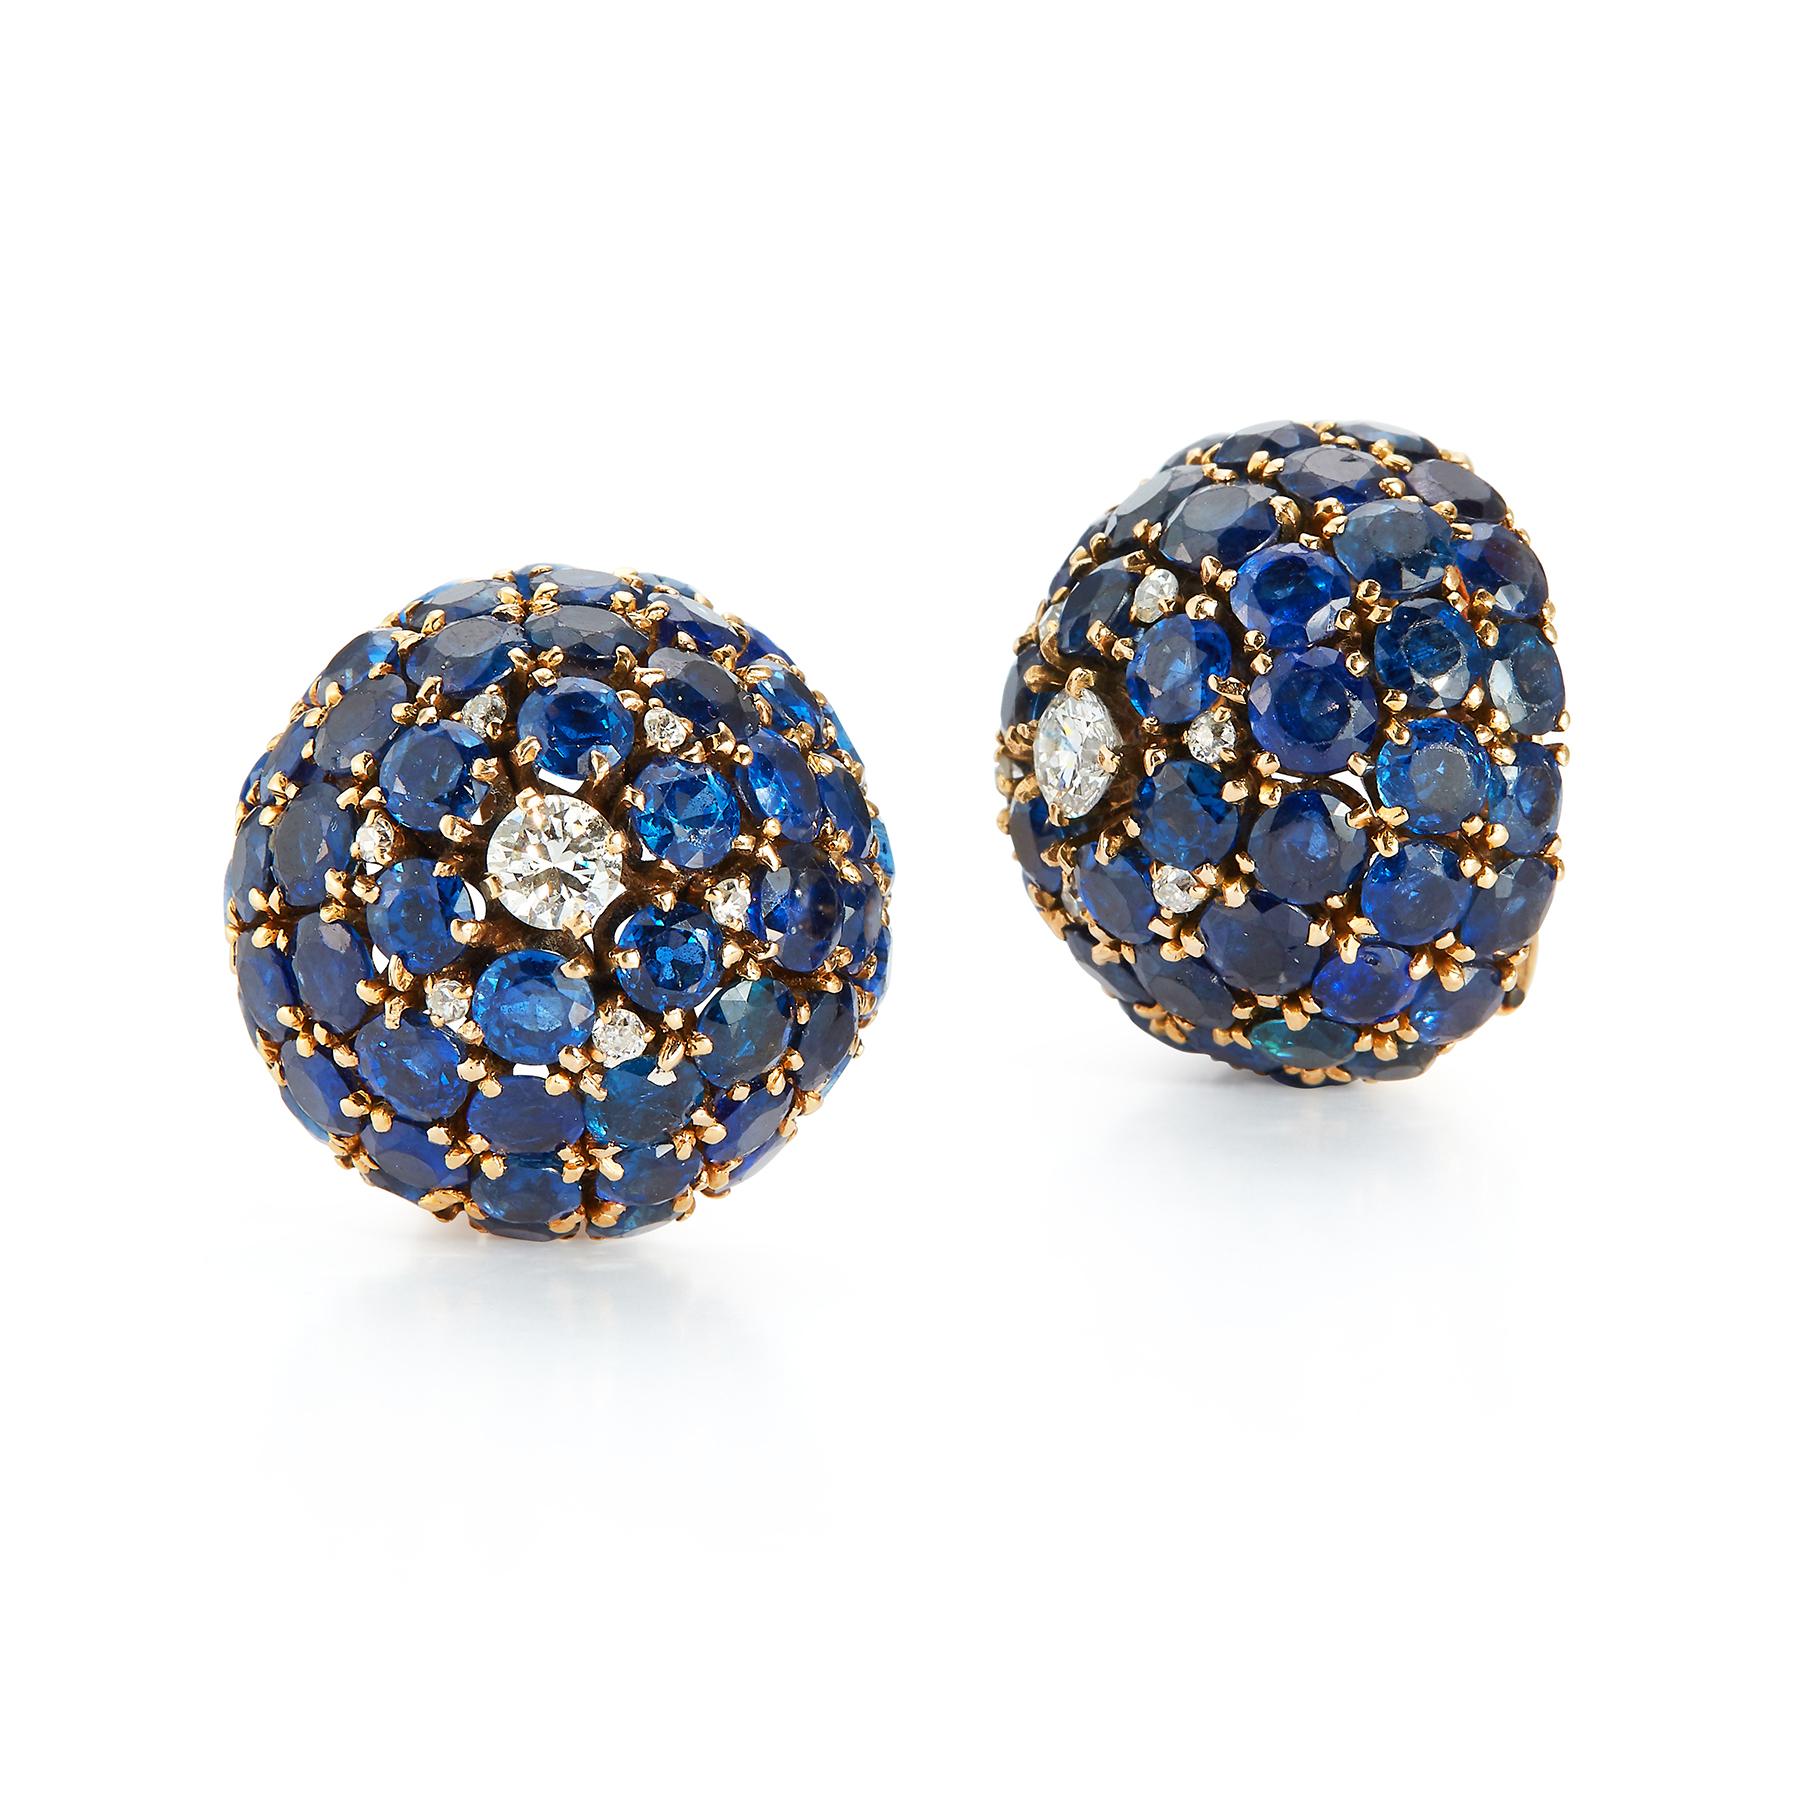 Van Cleef & Arpels Sapphire & Diamond Dome Earrings a round cut diamond surrounded by round cut sapphires all set in 18k yellow gold 

Measurements: .50